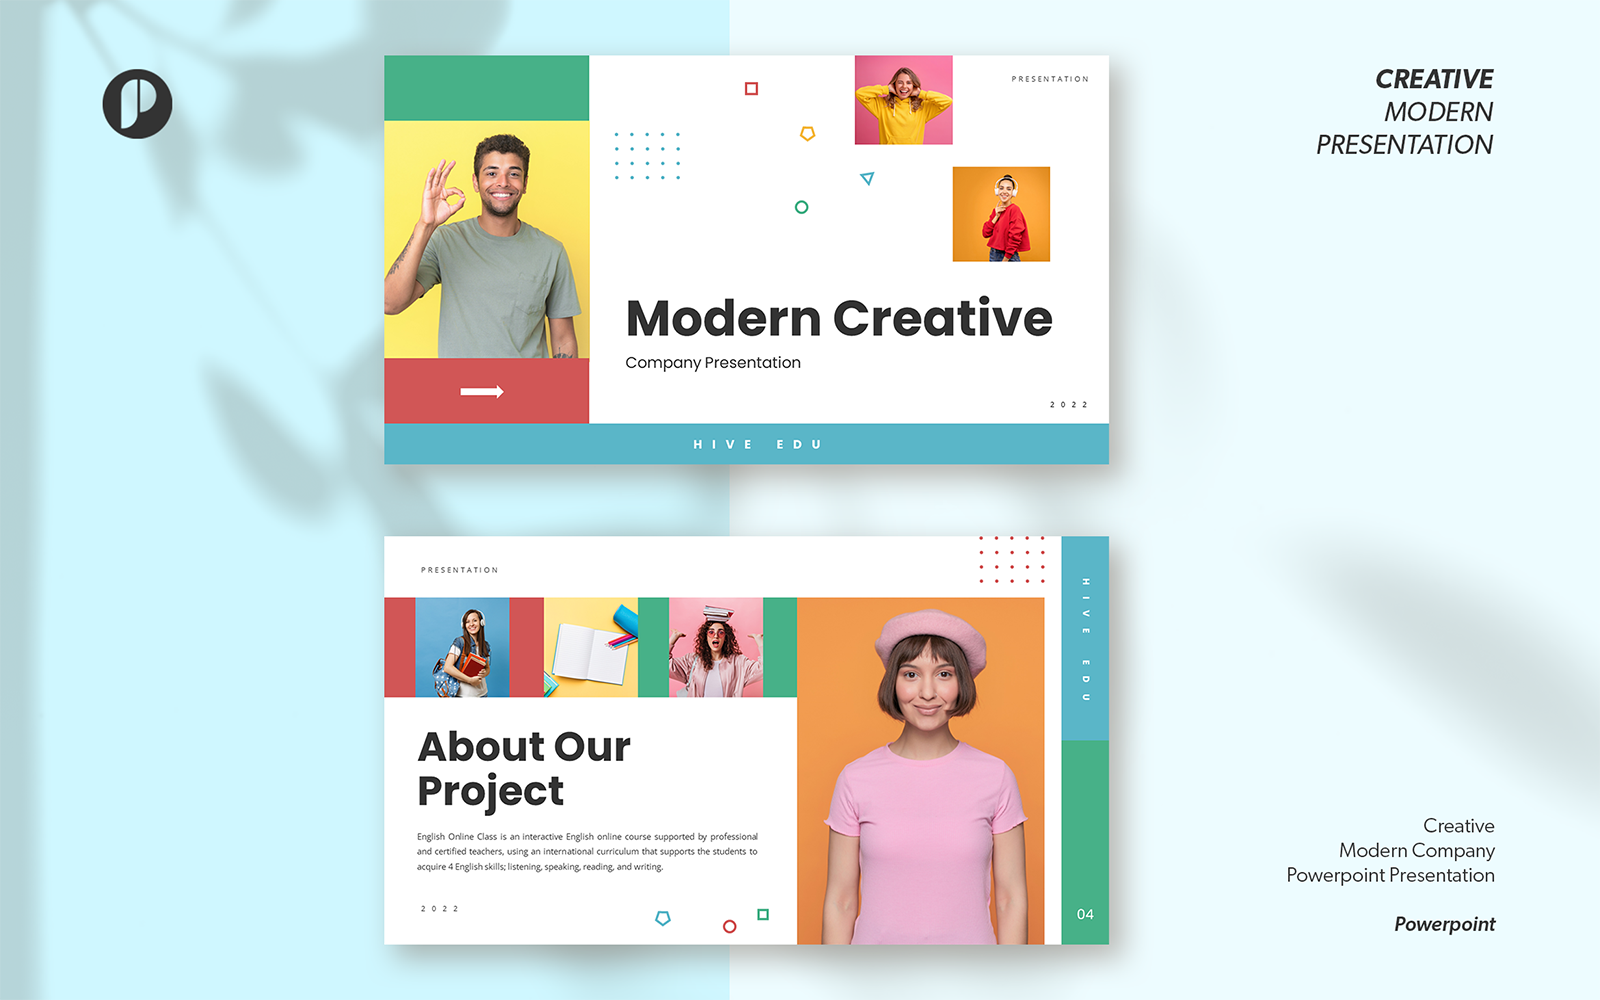 Hive – Colorful Creative Modern Startup PowerPoint Presentation